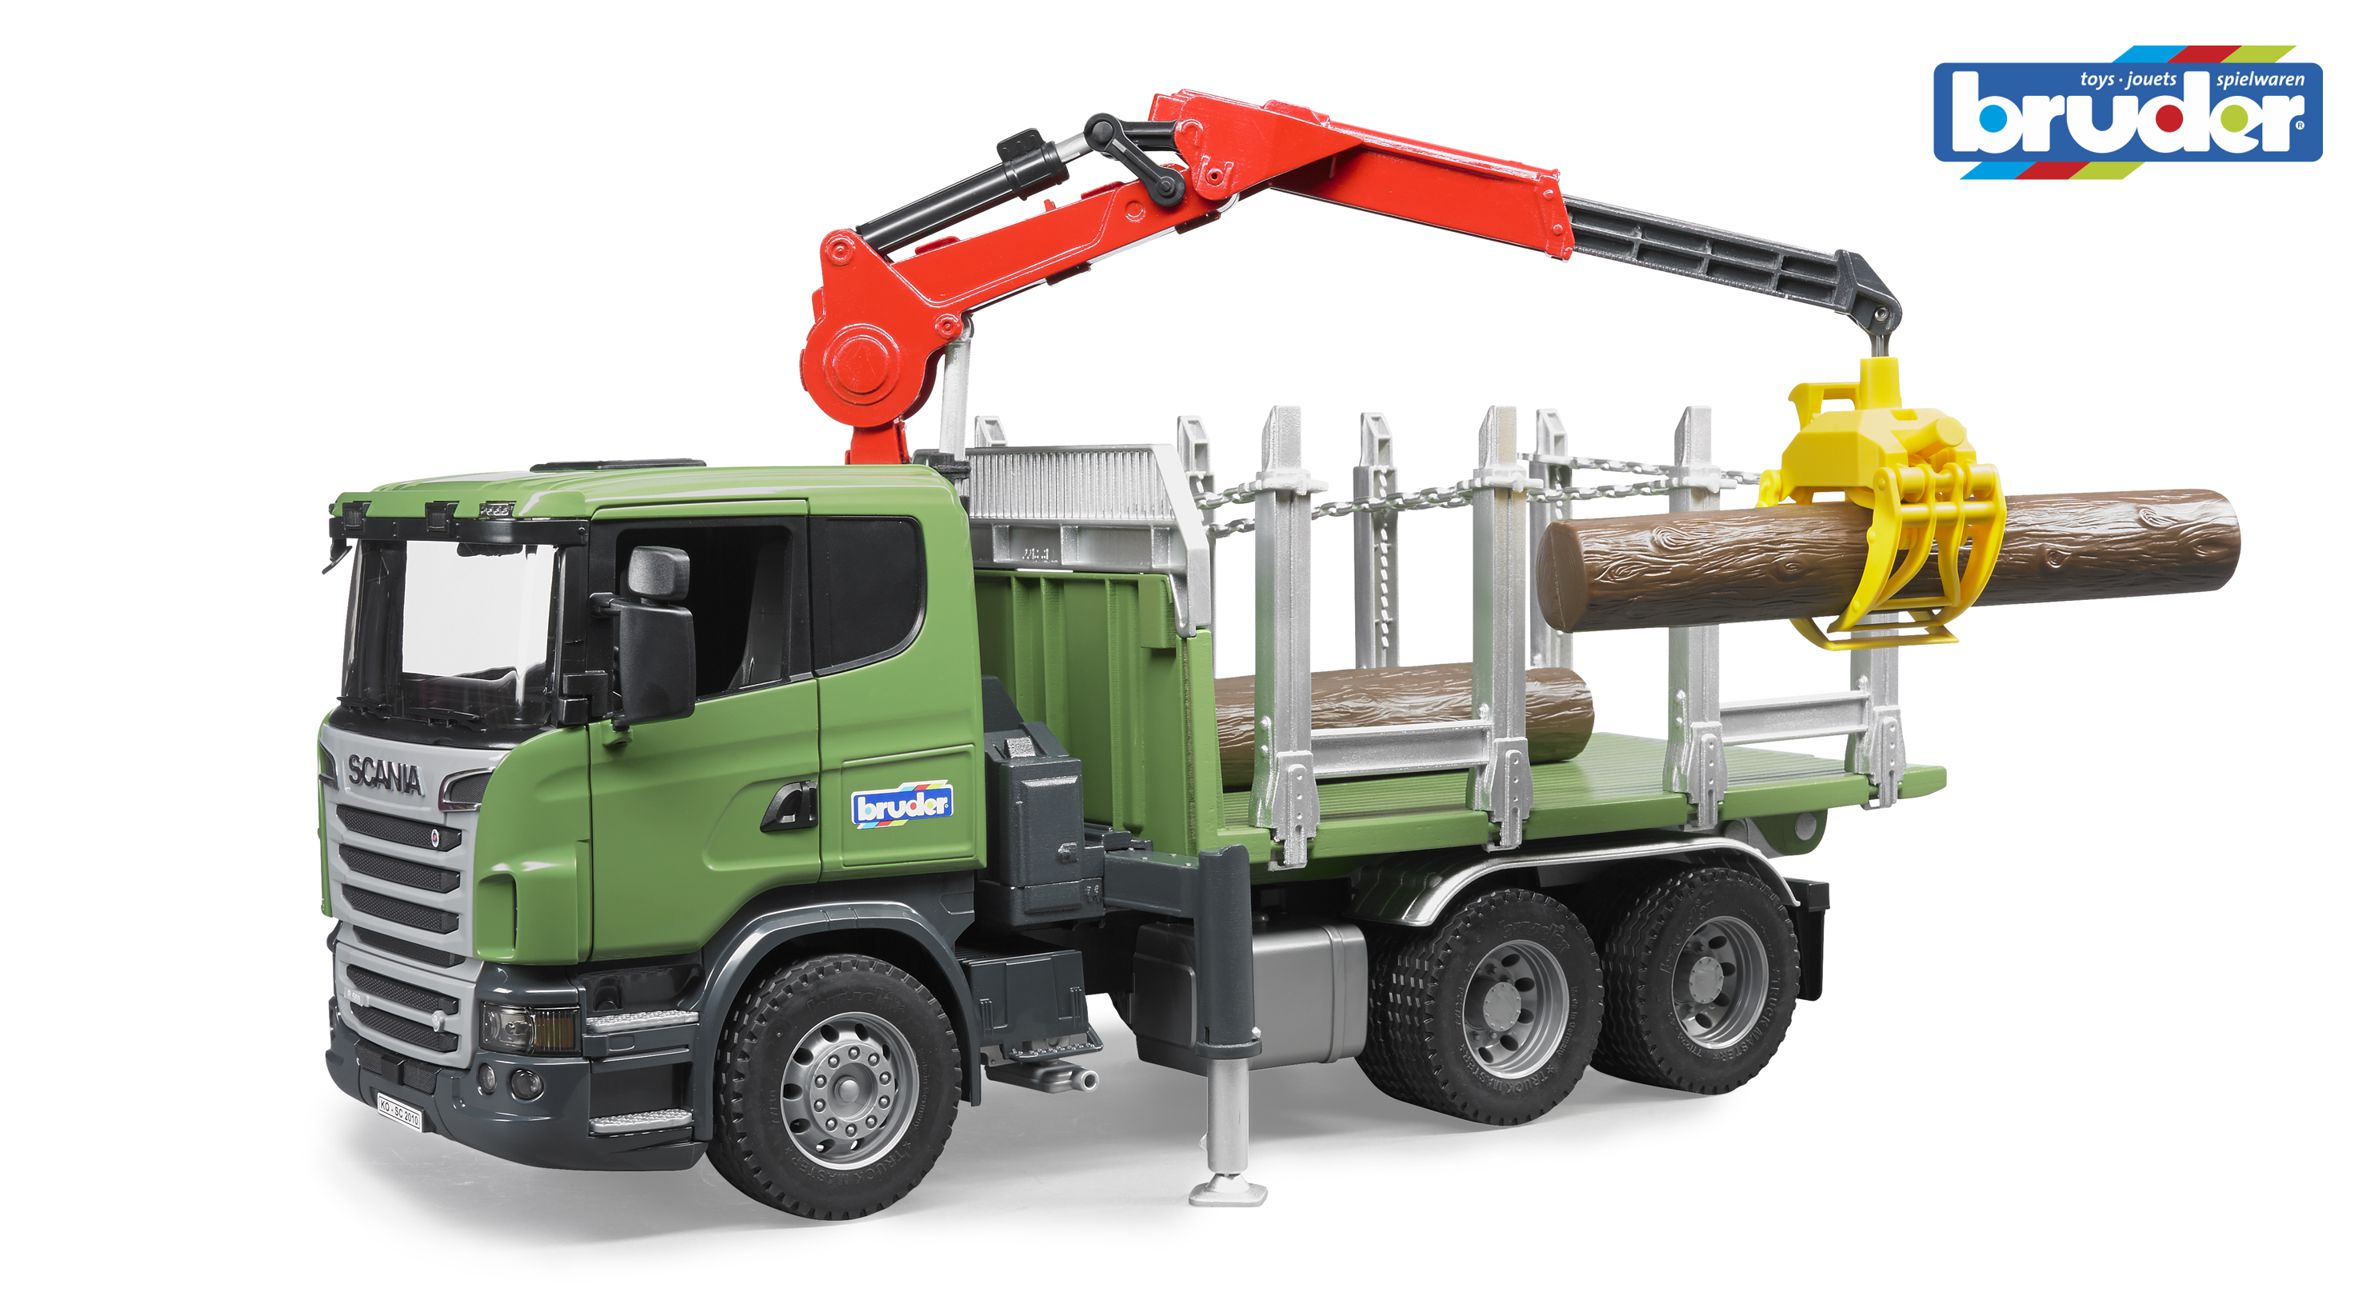 Product Image - Bruder 03524 - Scania R-series Timber truck with loading crane and 3 trunks - Scale 1:16